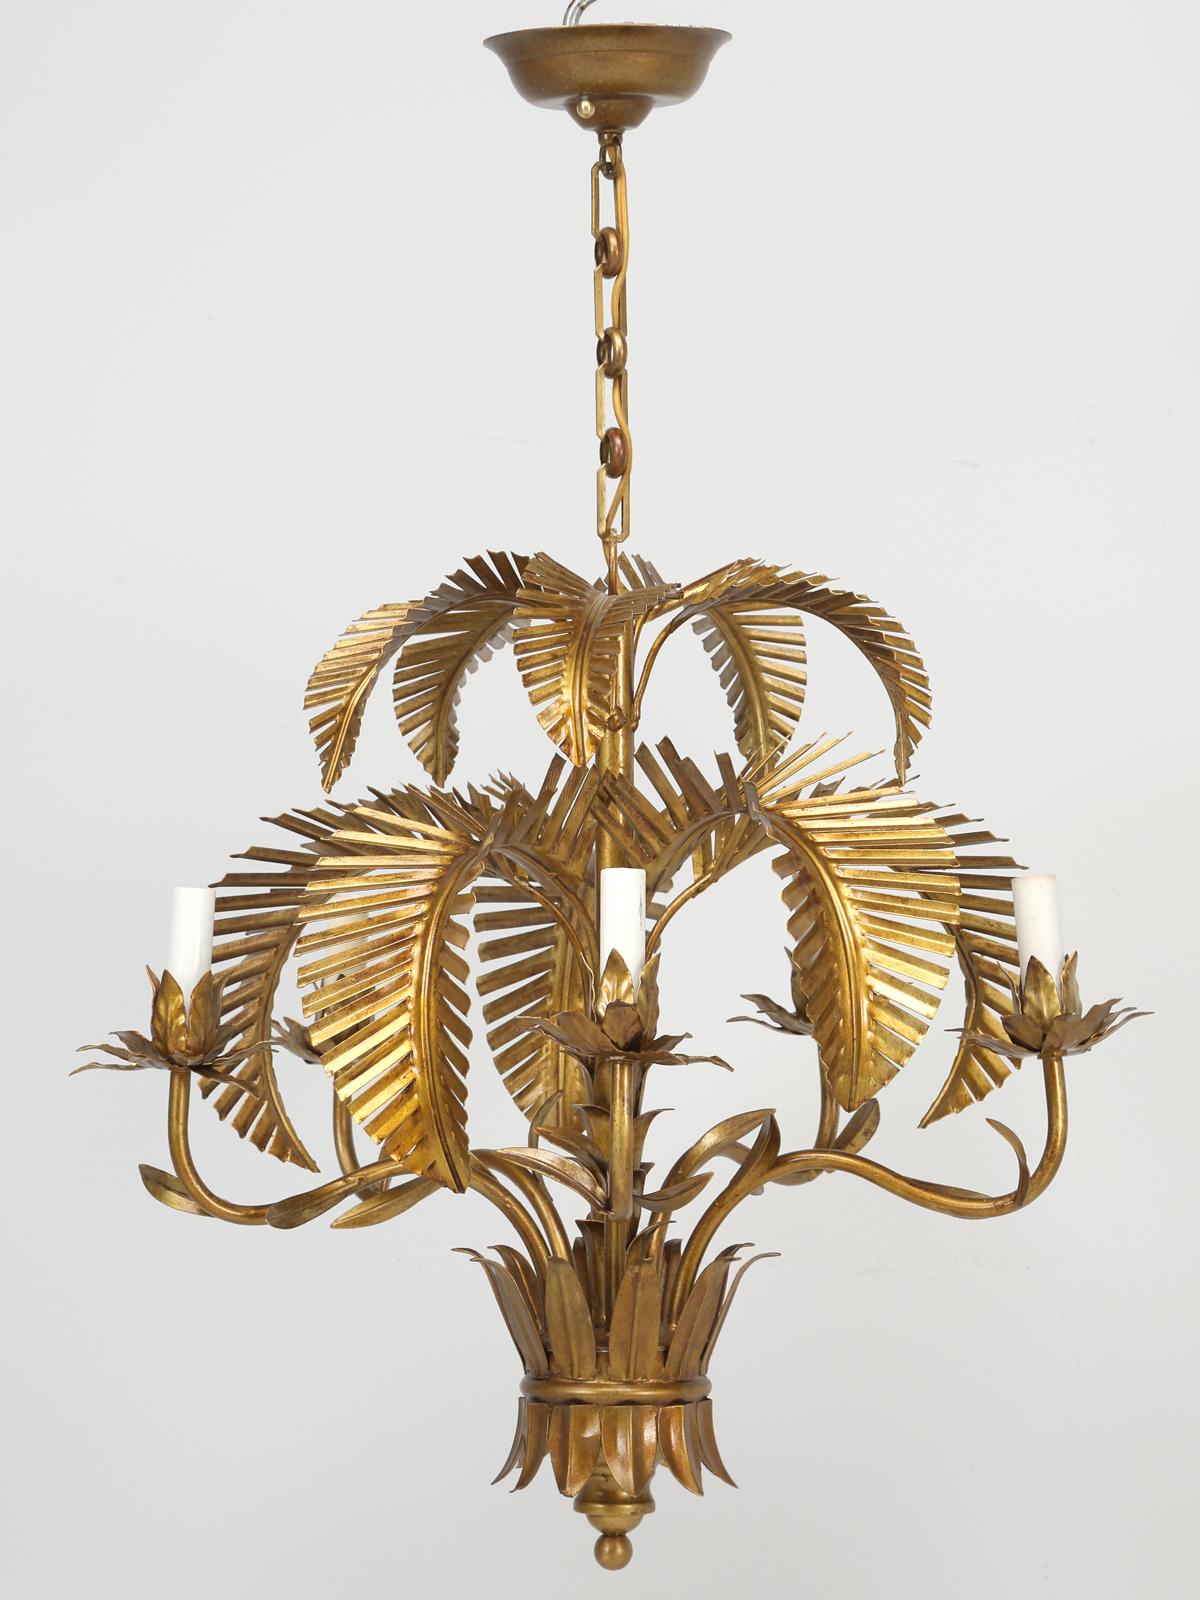 Vintage palm tree frond chandelier with gilt leaves. Probably made in Italy during the 1960s.
Height provided is for the chandelier alone. The chain is 7.5